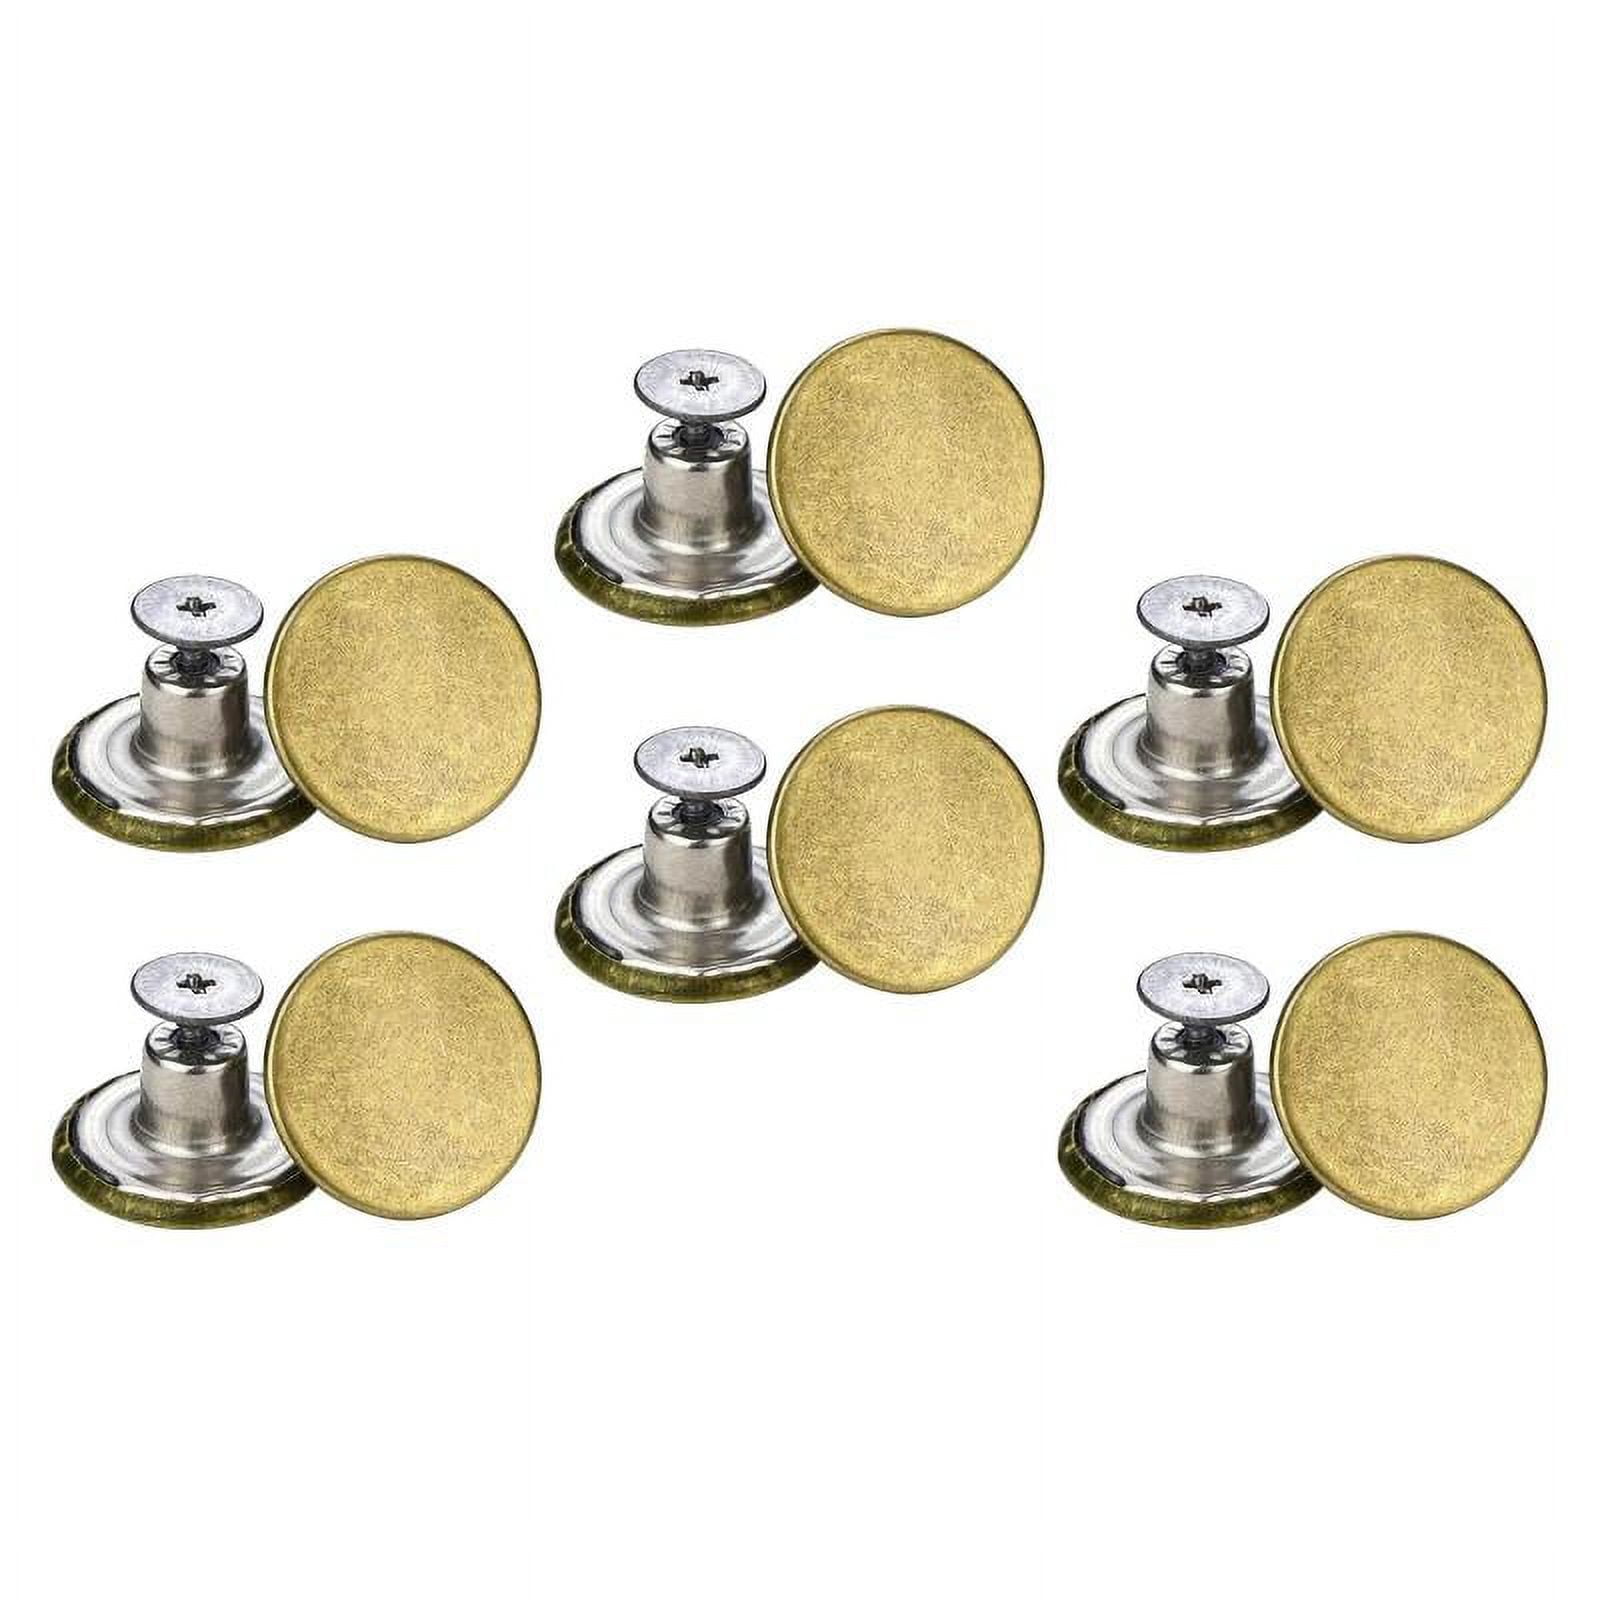 12 Pcs Buttons 17mm Metal Jean Button Replacement with Tool, No Sewing  Button Pants - Little Star